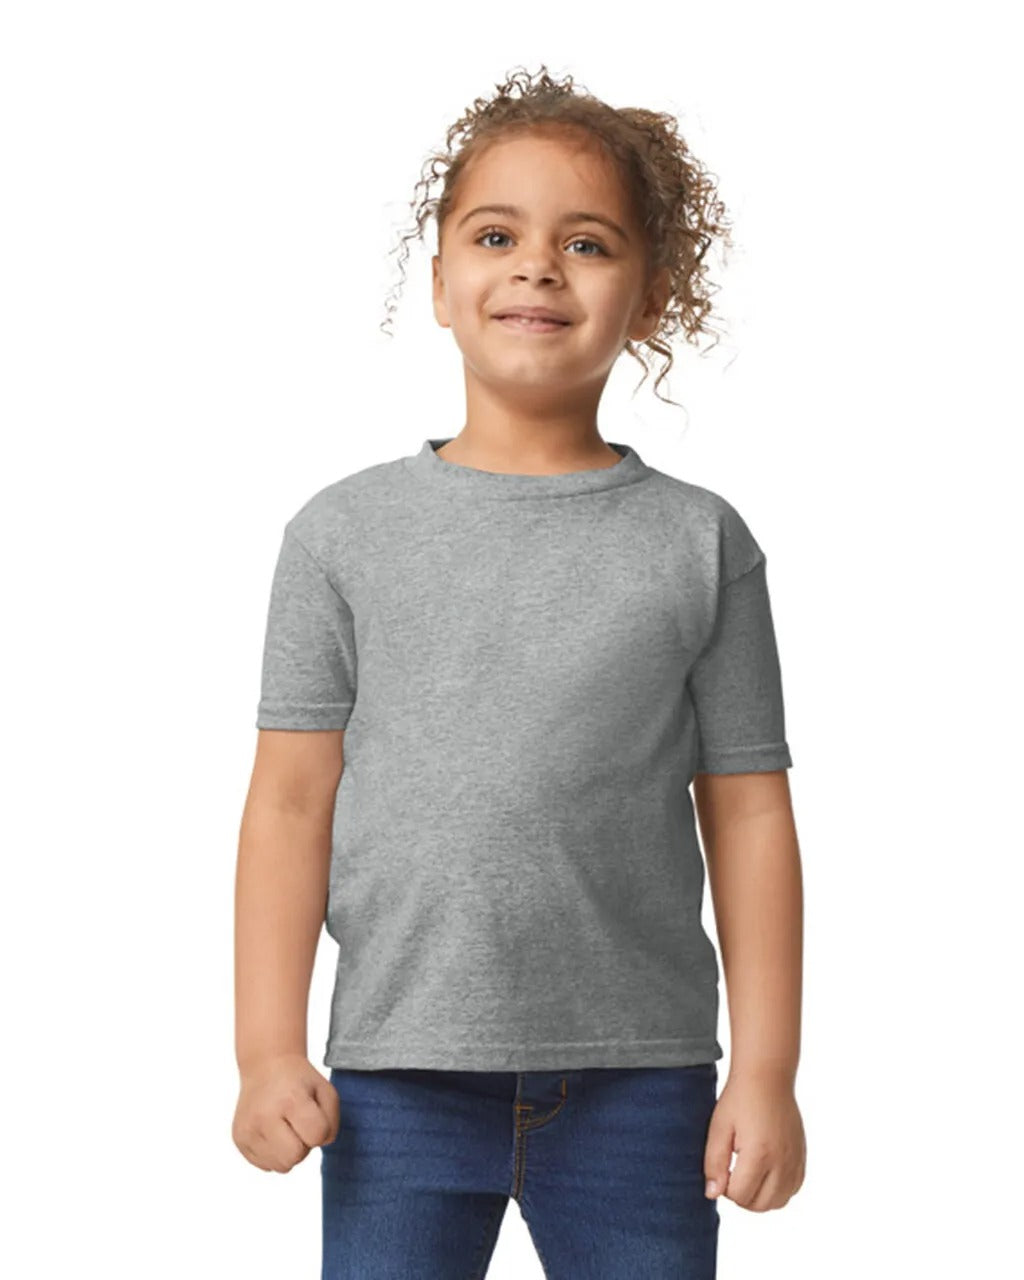 Toddlers Tshirts